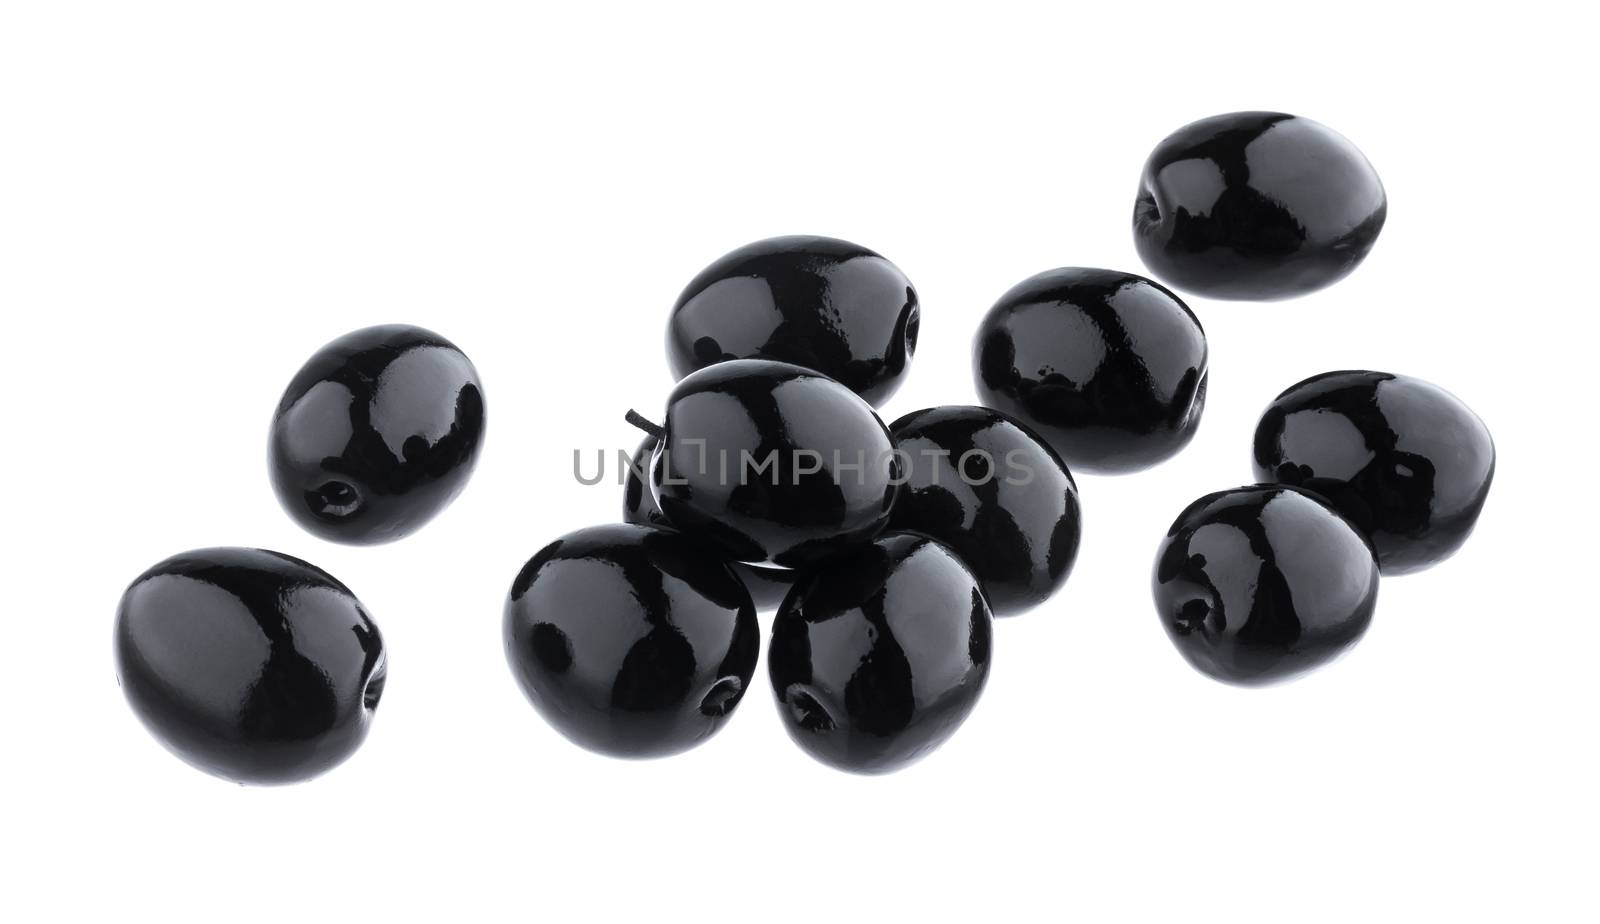 Heap of black olives isolated on white background with clipping path by xamtiw